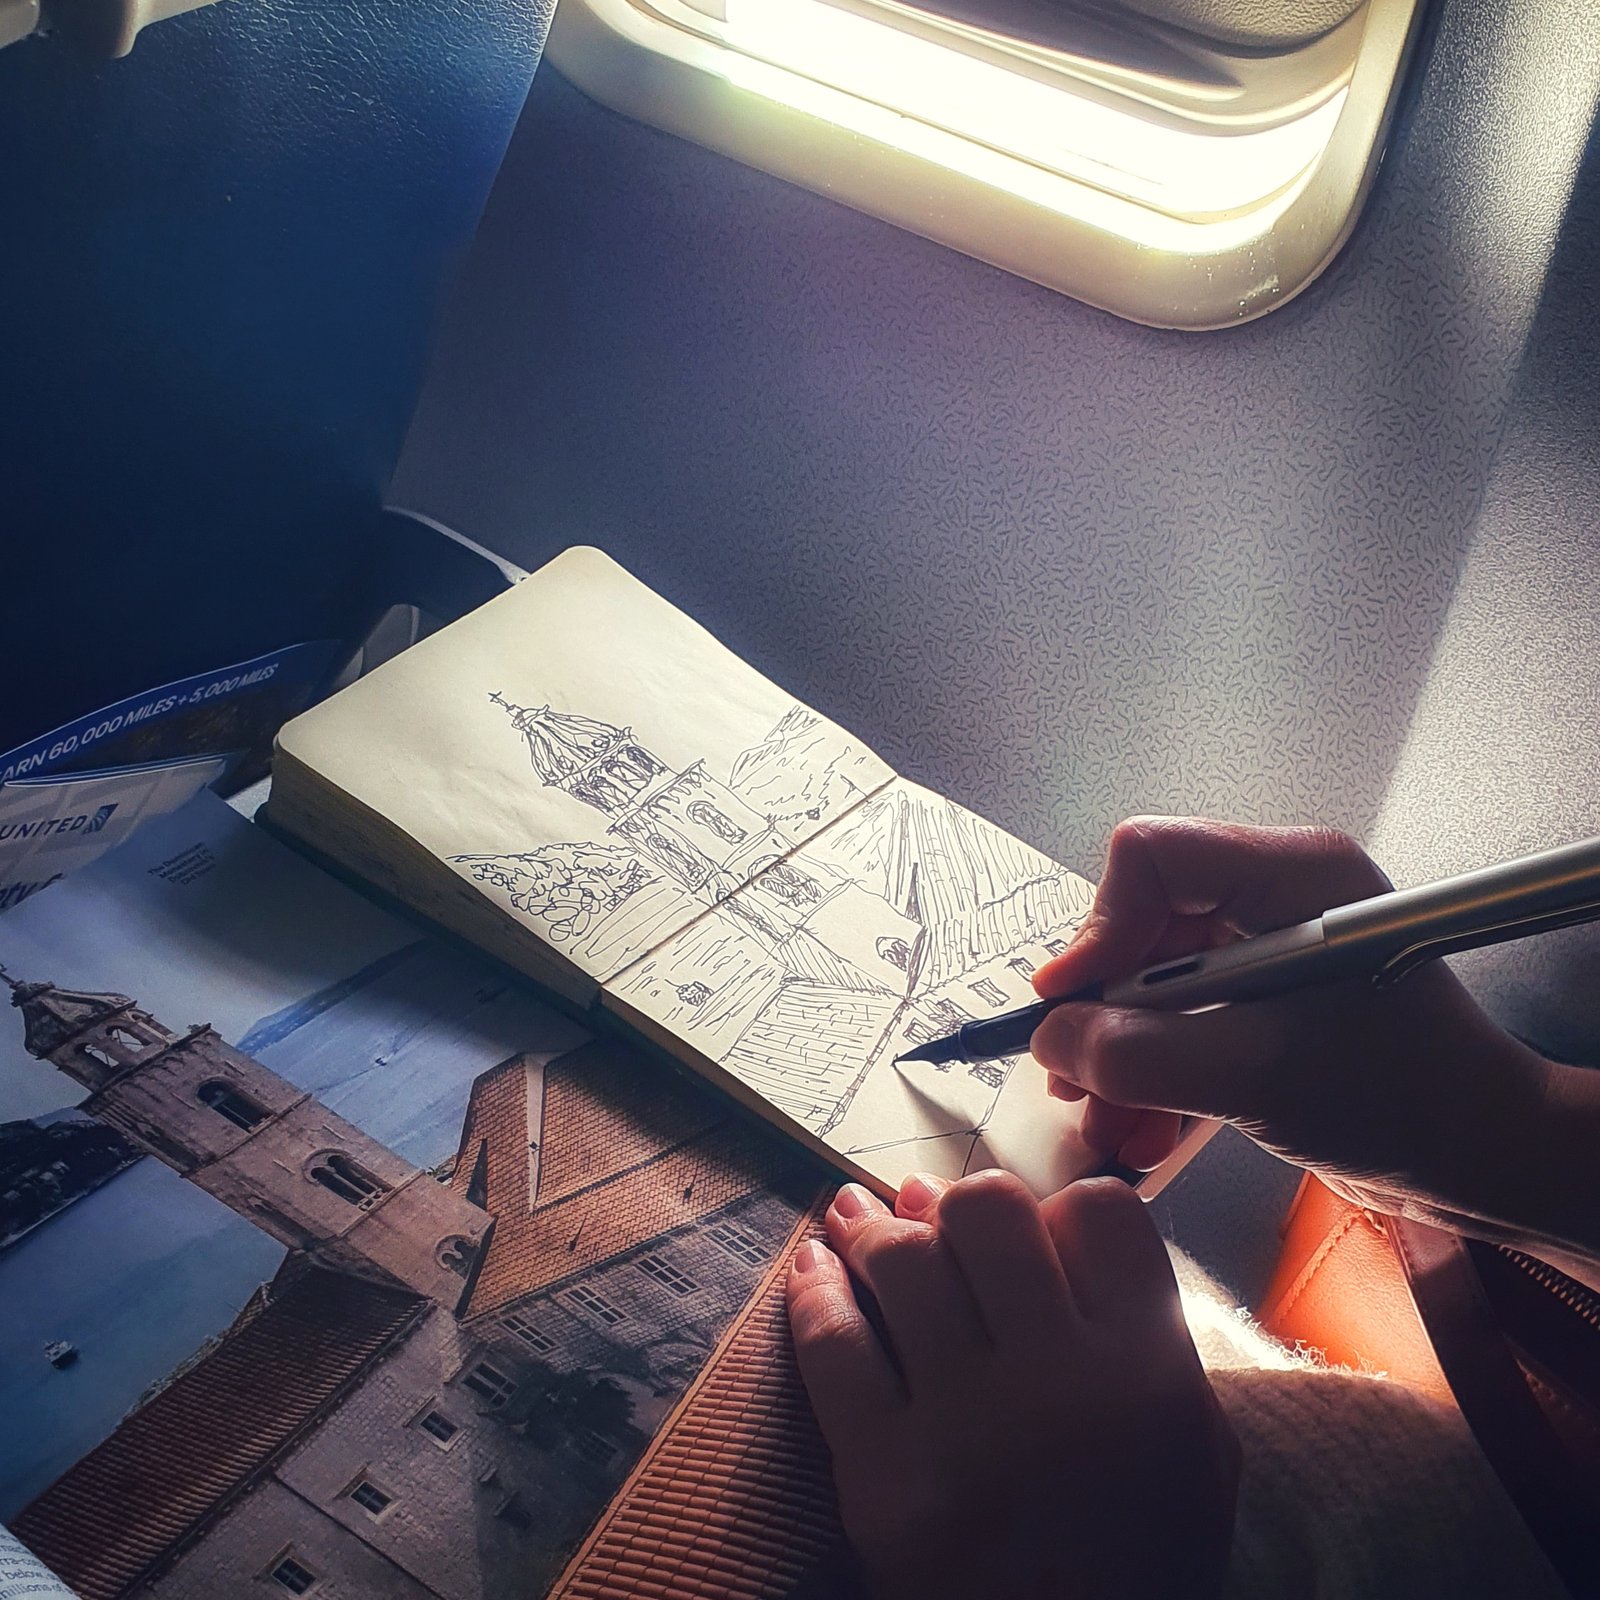 Sketching in the airplane